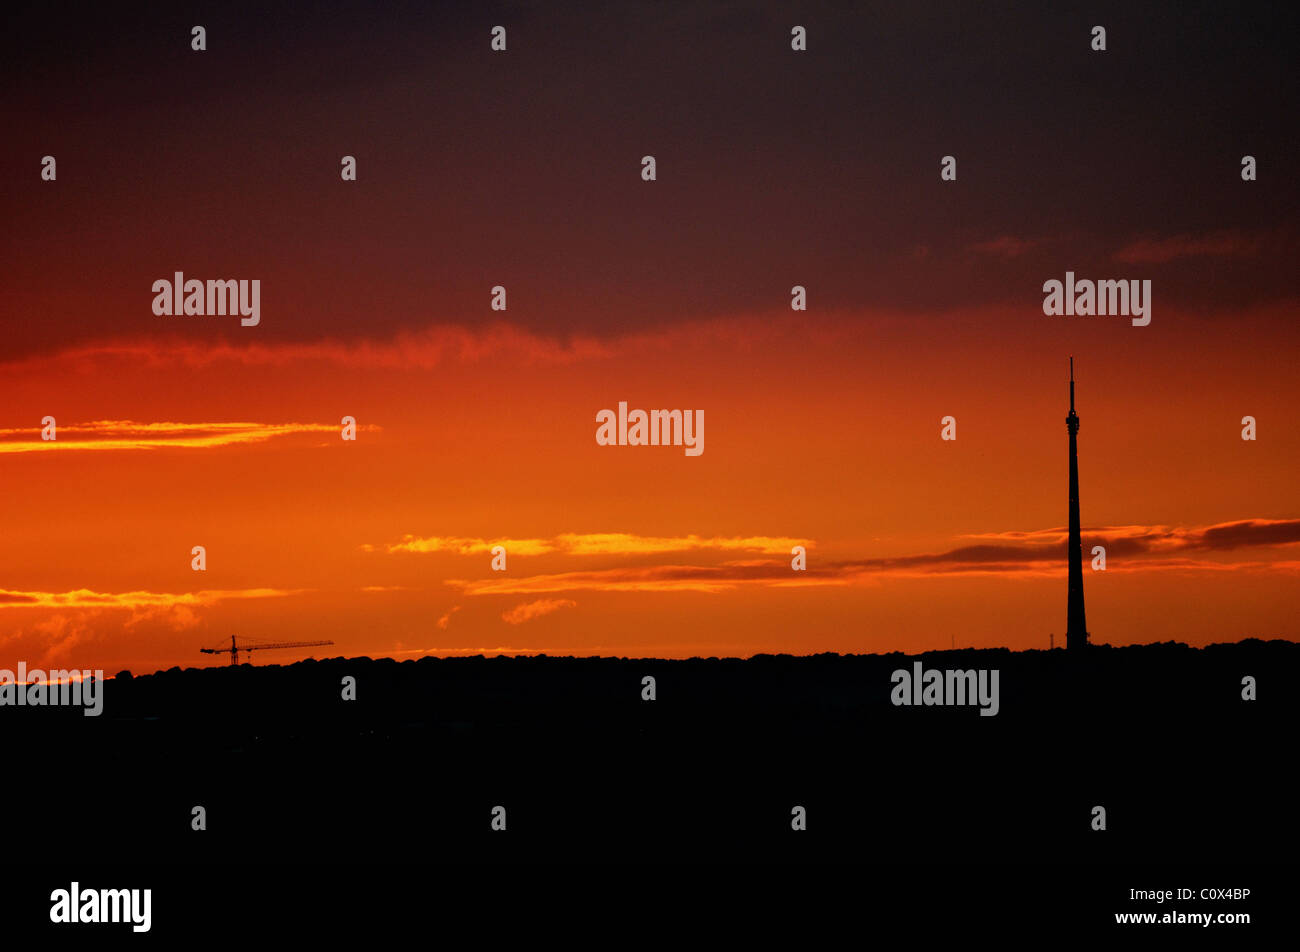 Sunset Emley montante TV Foto Stock